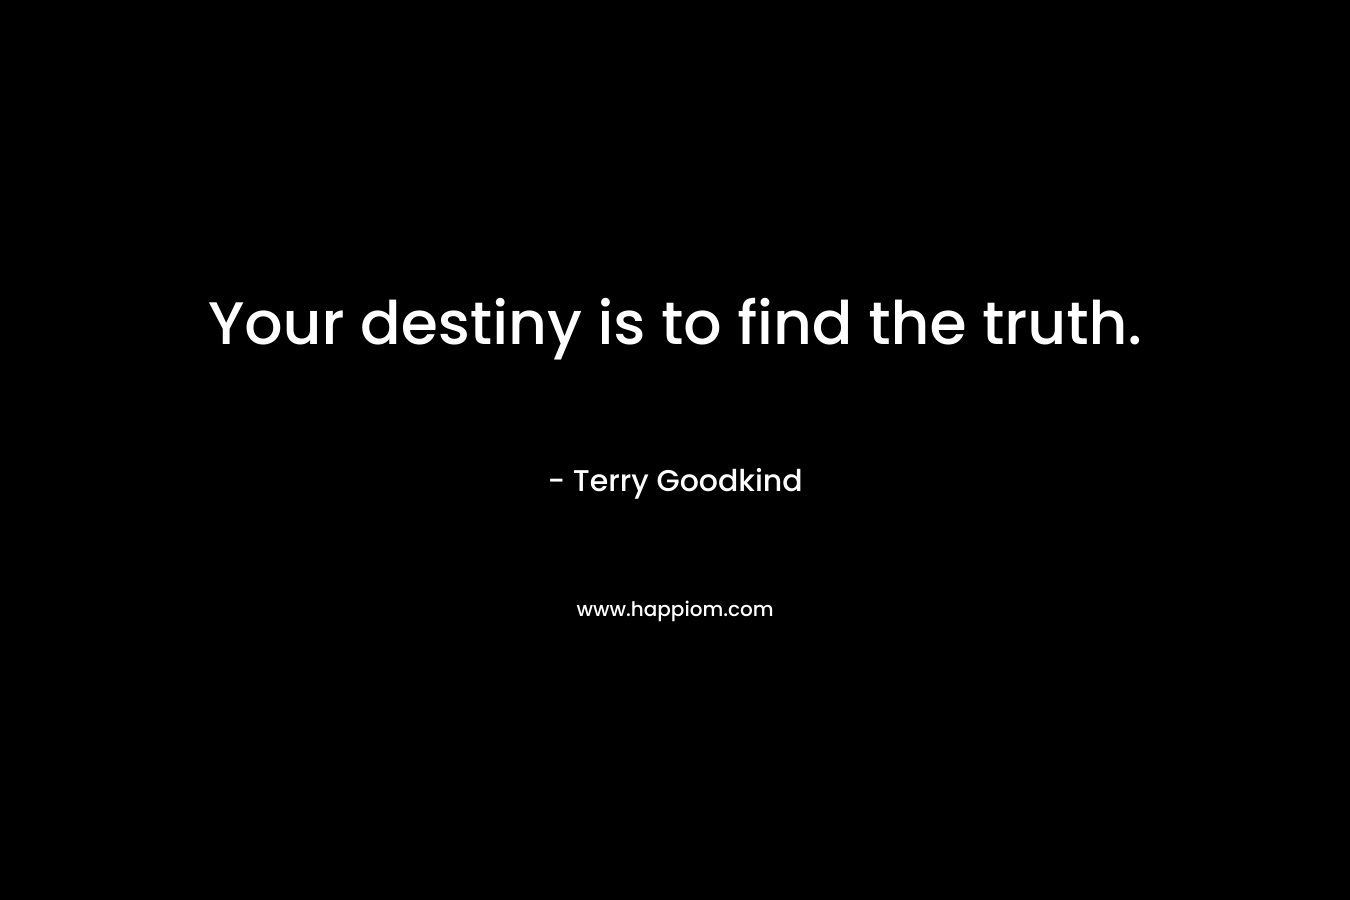 Your destiny is to find the truth. – Terry Goodkind